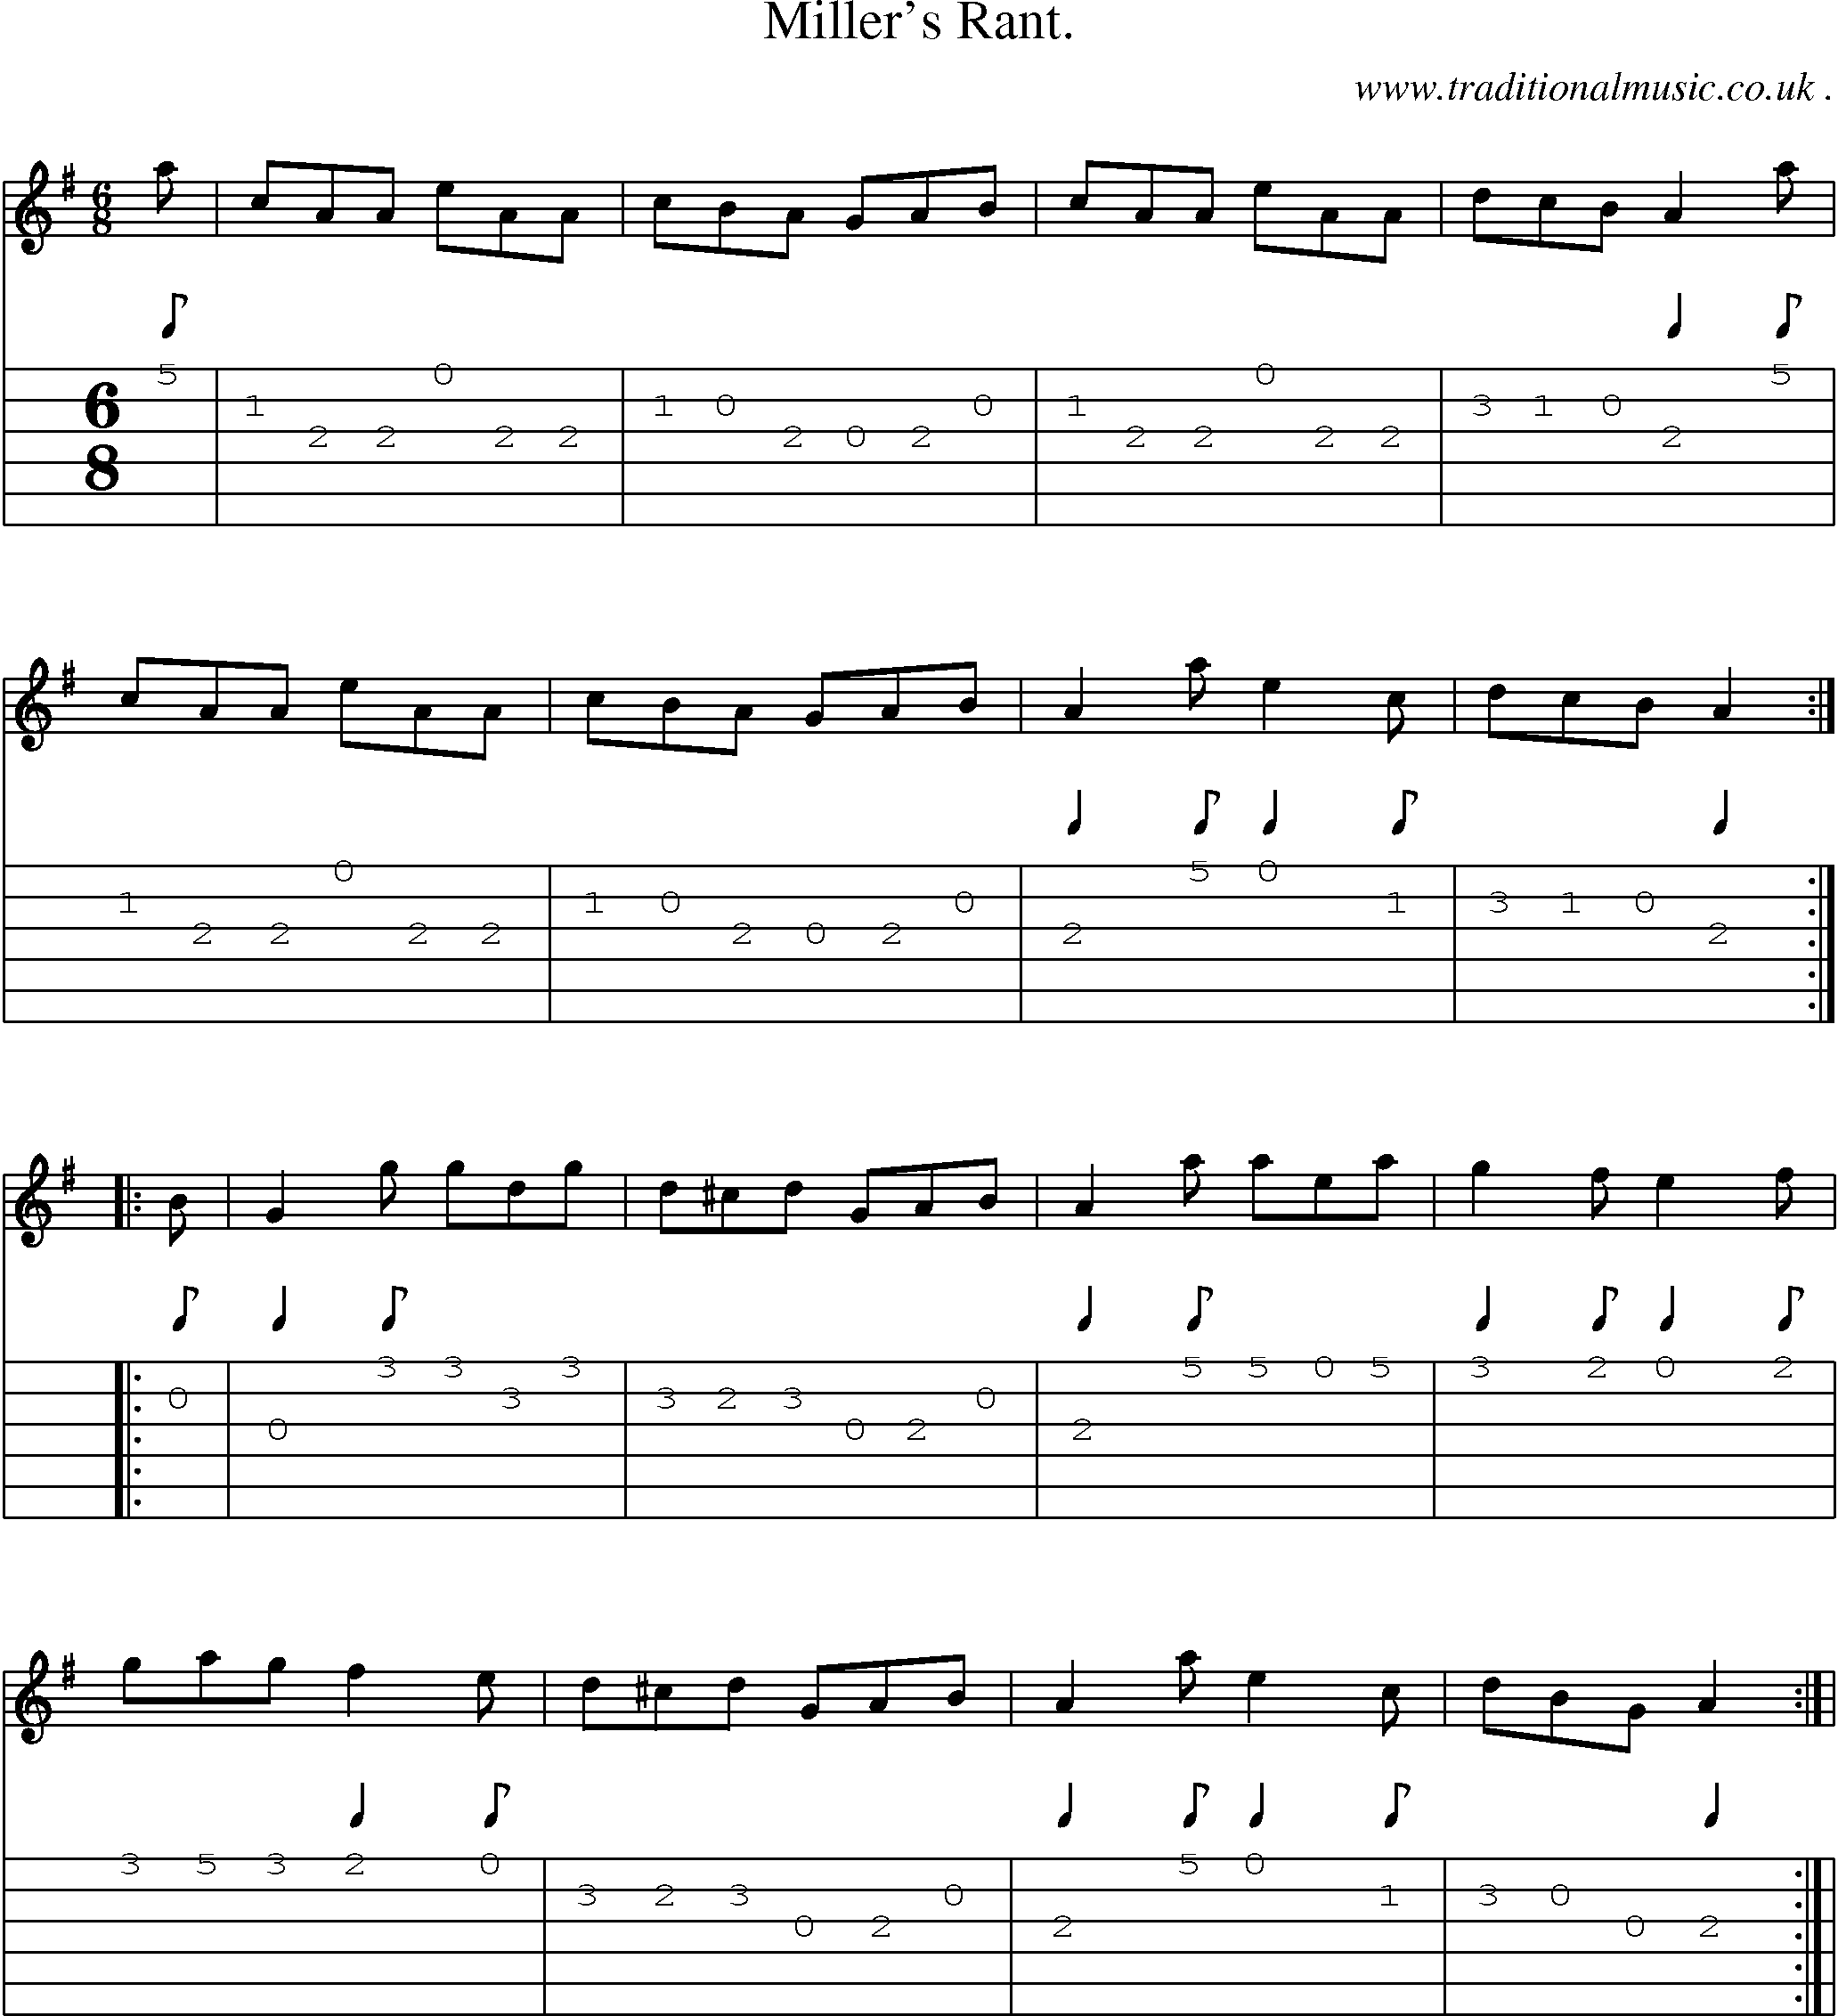 Sheet-Music and Guitar Tabs for Millers Rant